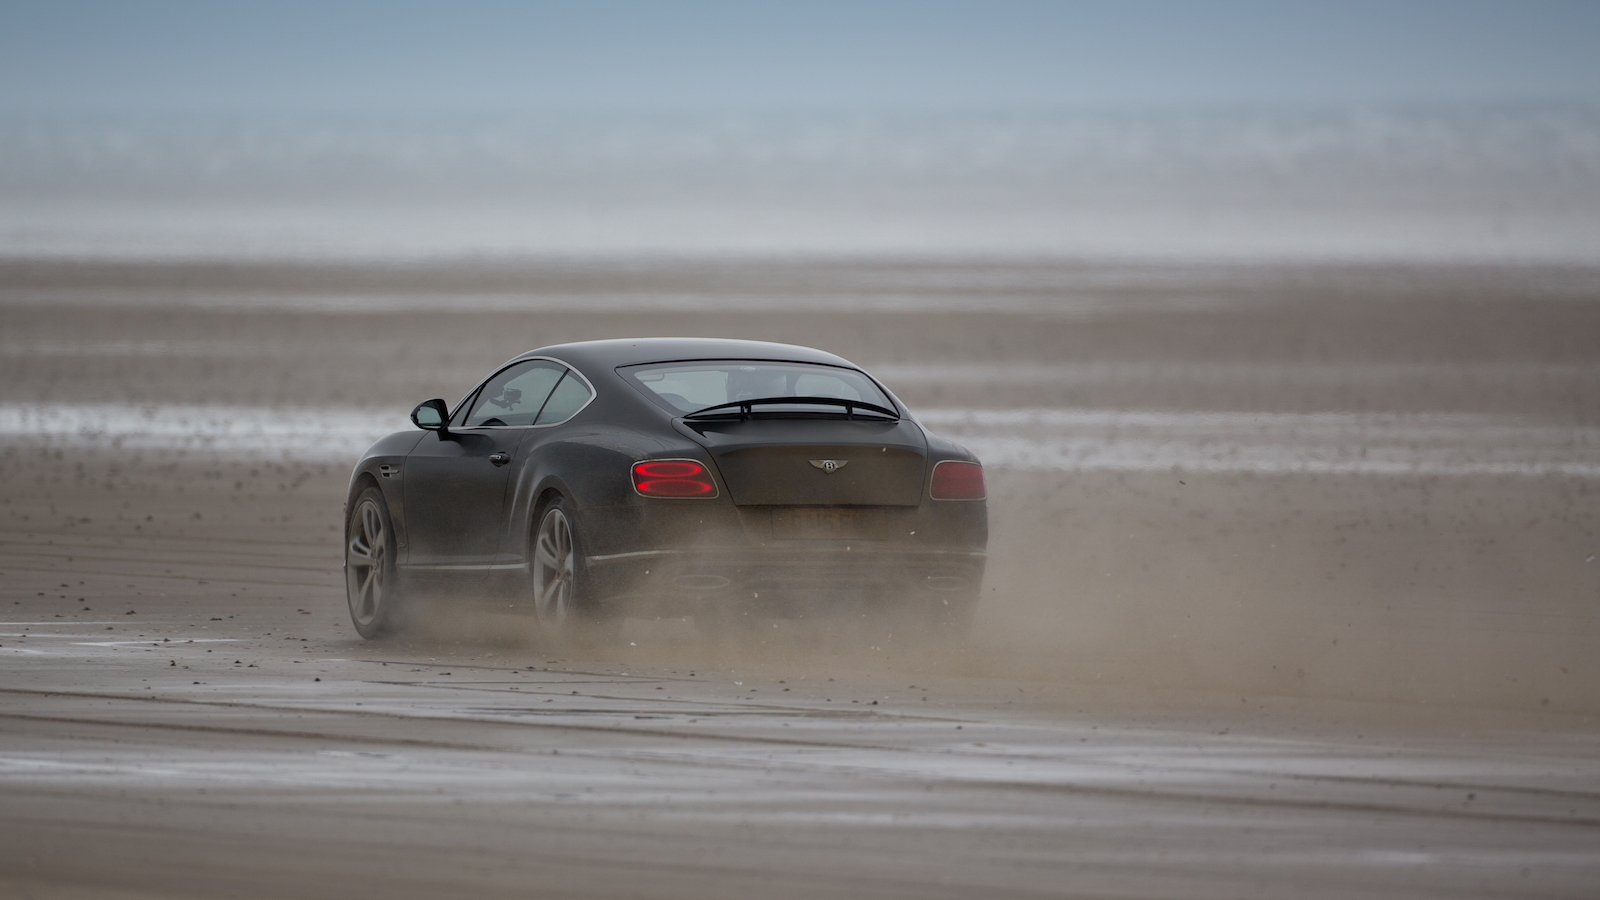 Idris Elba sets new Flying Mile UK land speed record in Bentley Continental GT